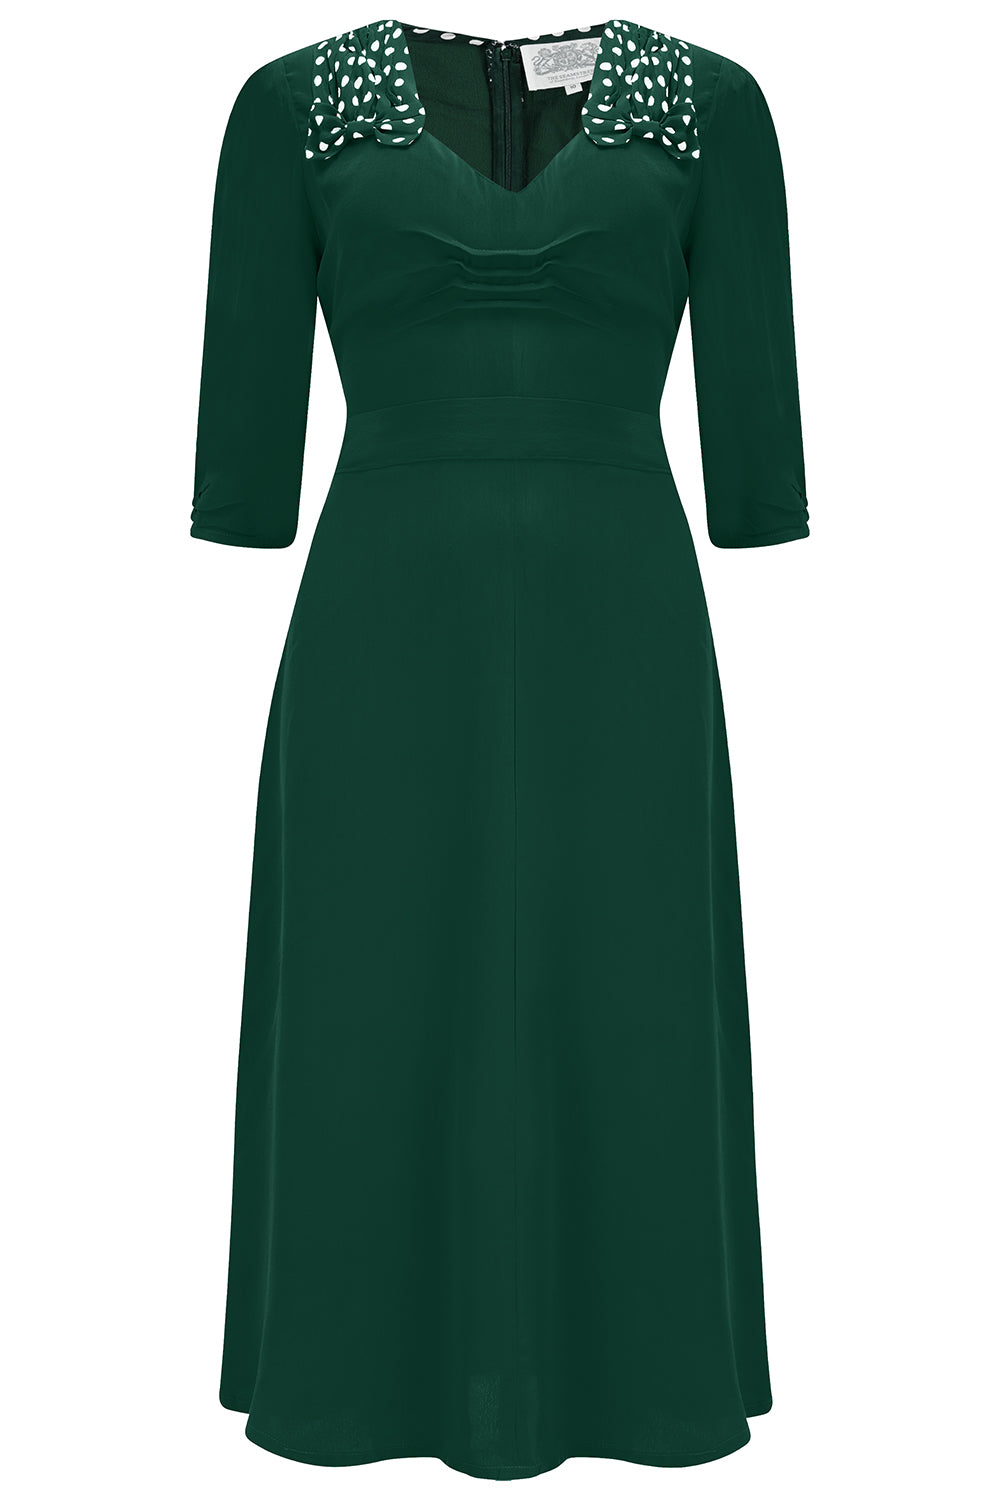 The "Veronica Dress " Hampton Green, A Classic 1940s Inspired Vintage Style By The Seamstress Of Bloomsbury product